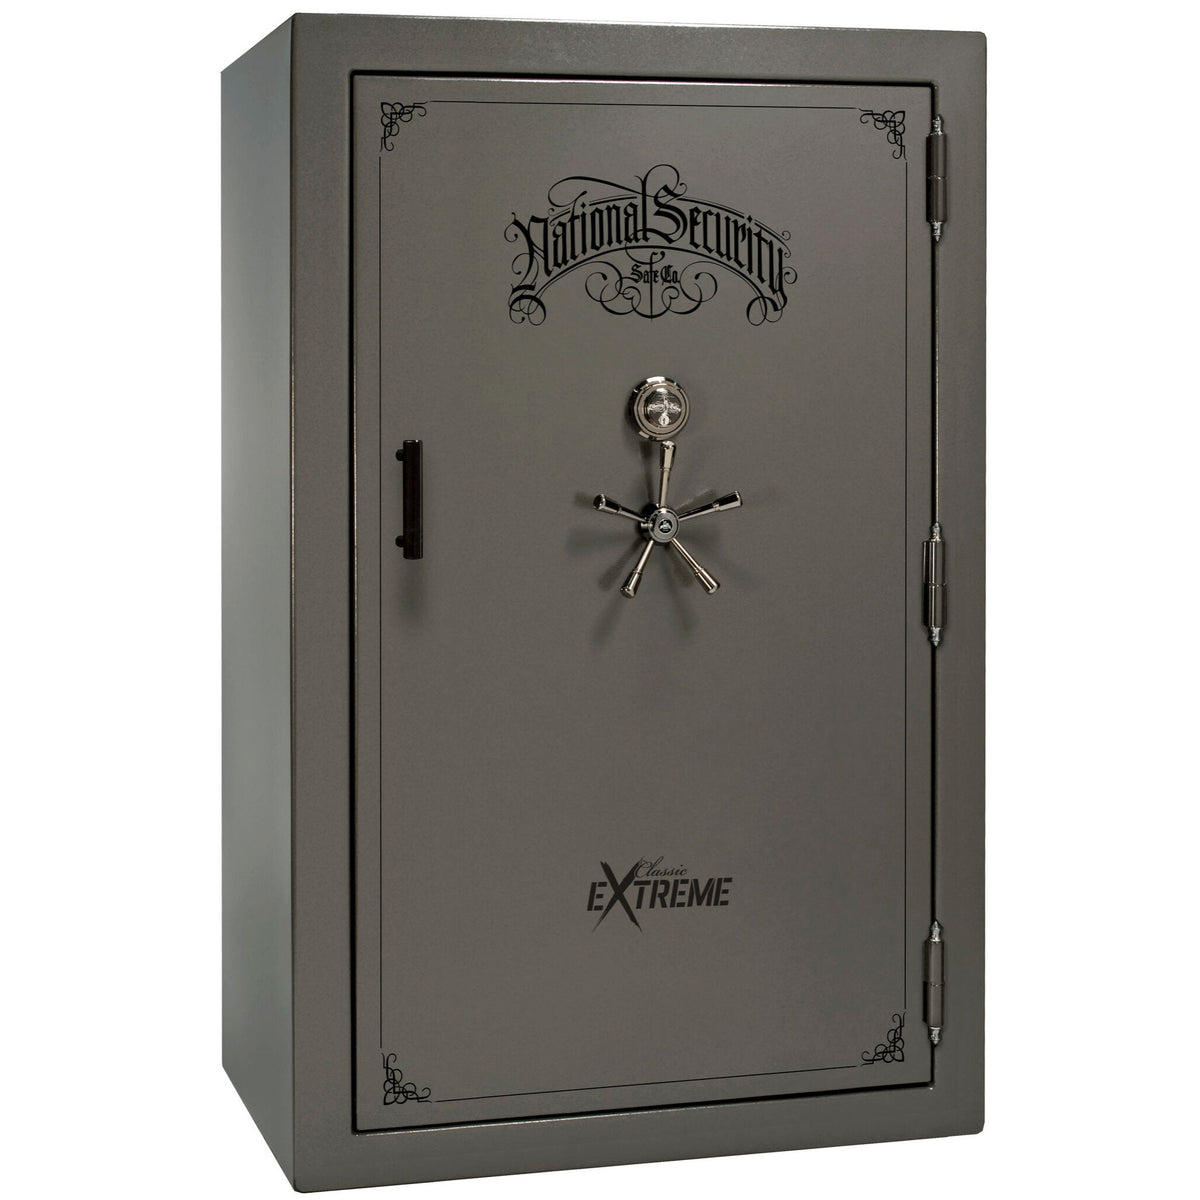 Liberty Classic Select Extreme Wide Body Safe in Gray Gloss with Black Chrome Mechanical Lock.